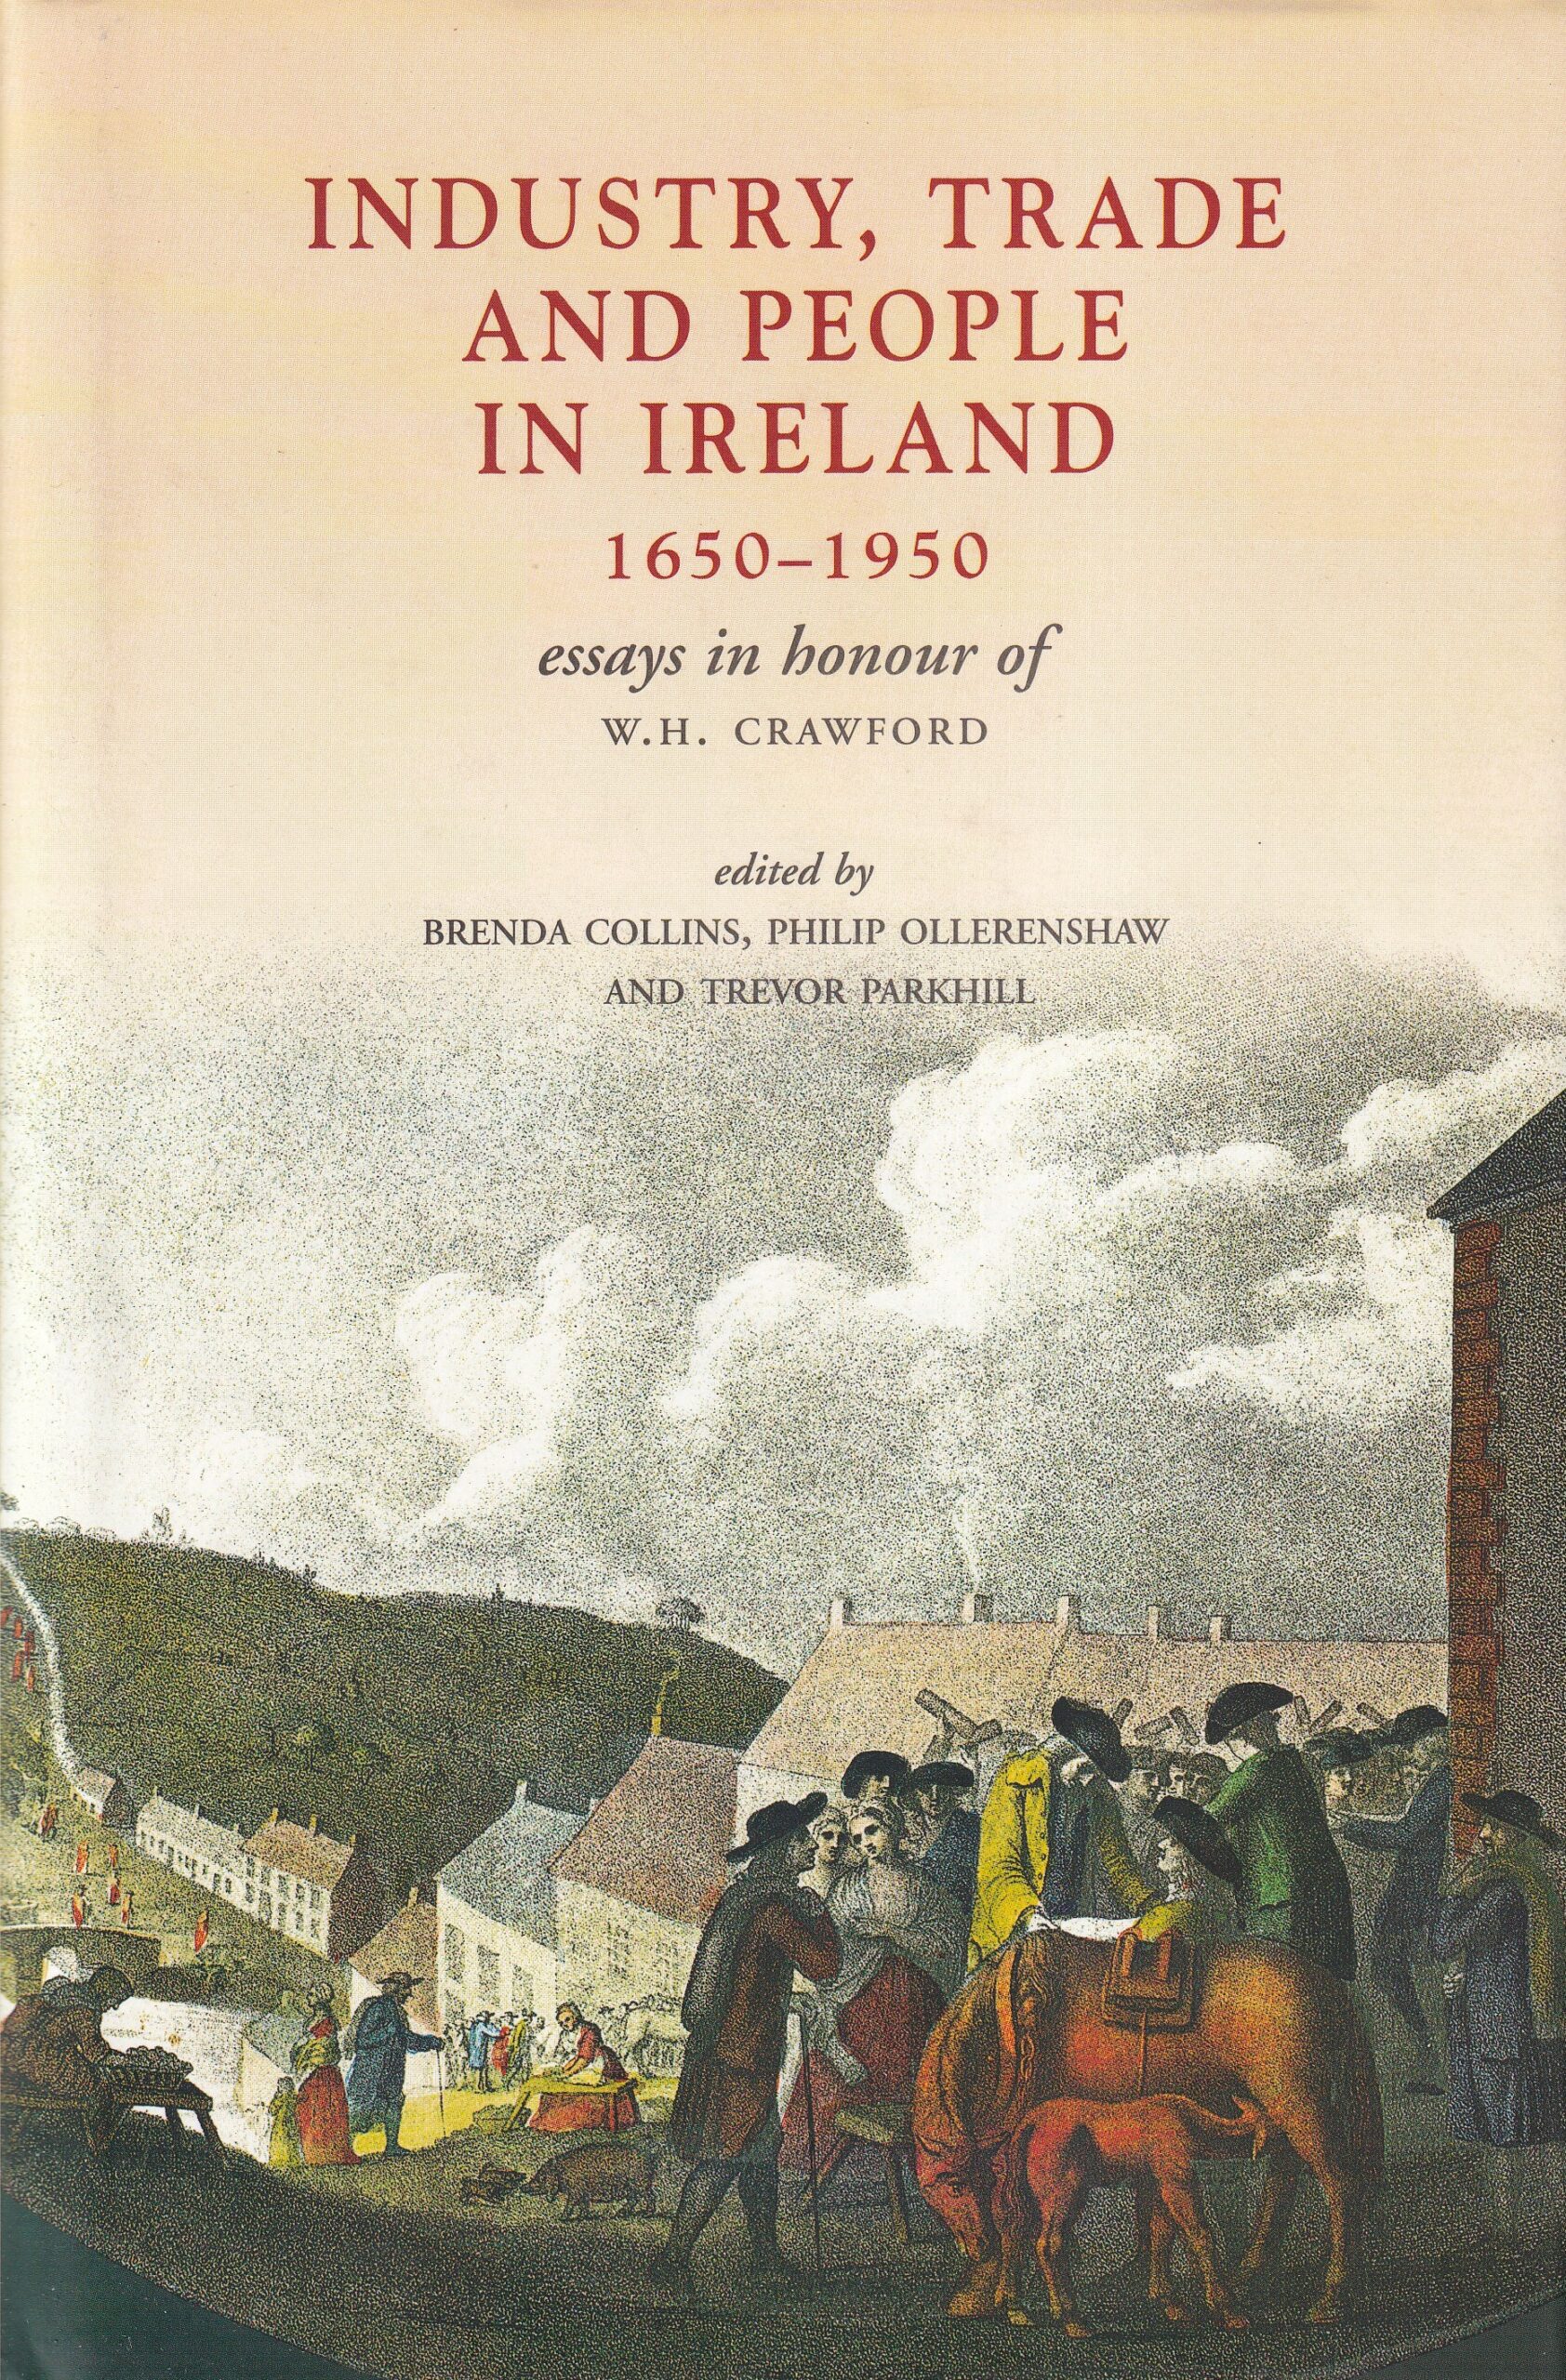 Industry, Trade, and People in Ireland 1650-1950: Essays in Honour of W.H.Crawford | Brenda Collins, Philip Ollerenshaw and Trevor Parkhill (eds.) | Charlie Byrne's